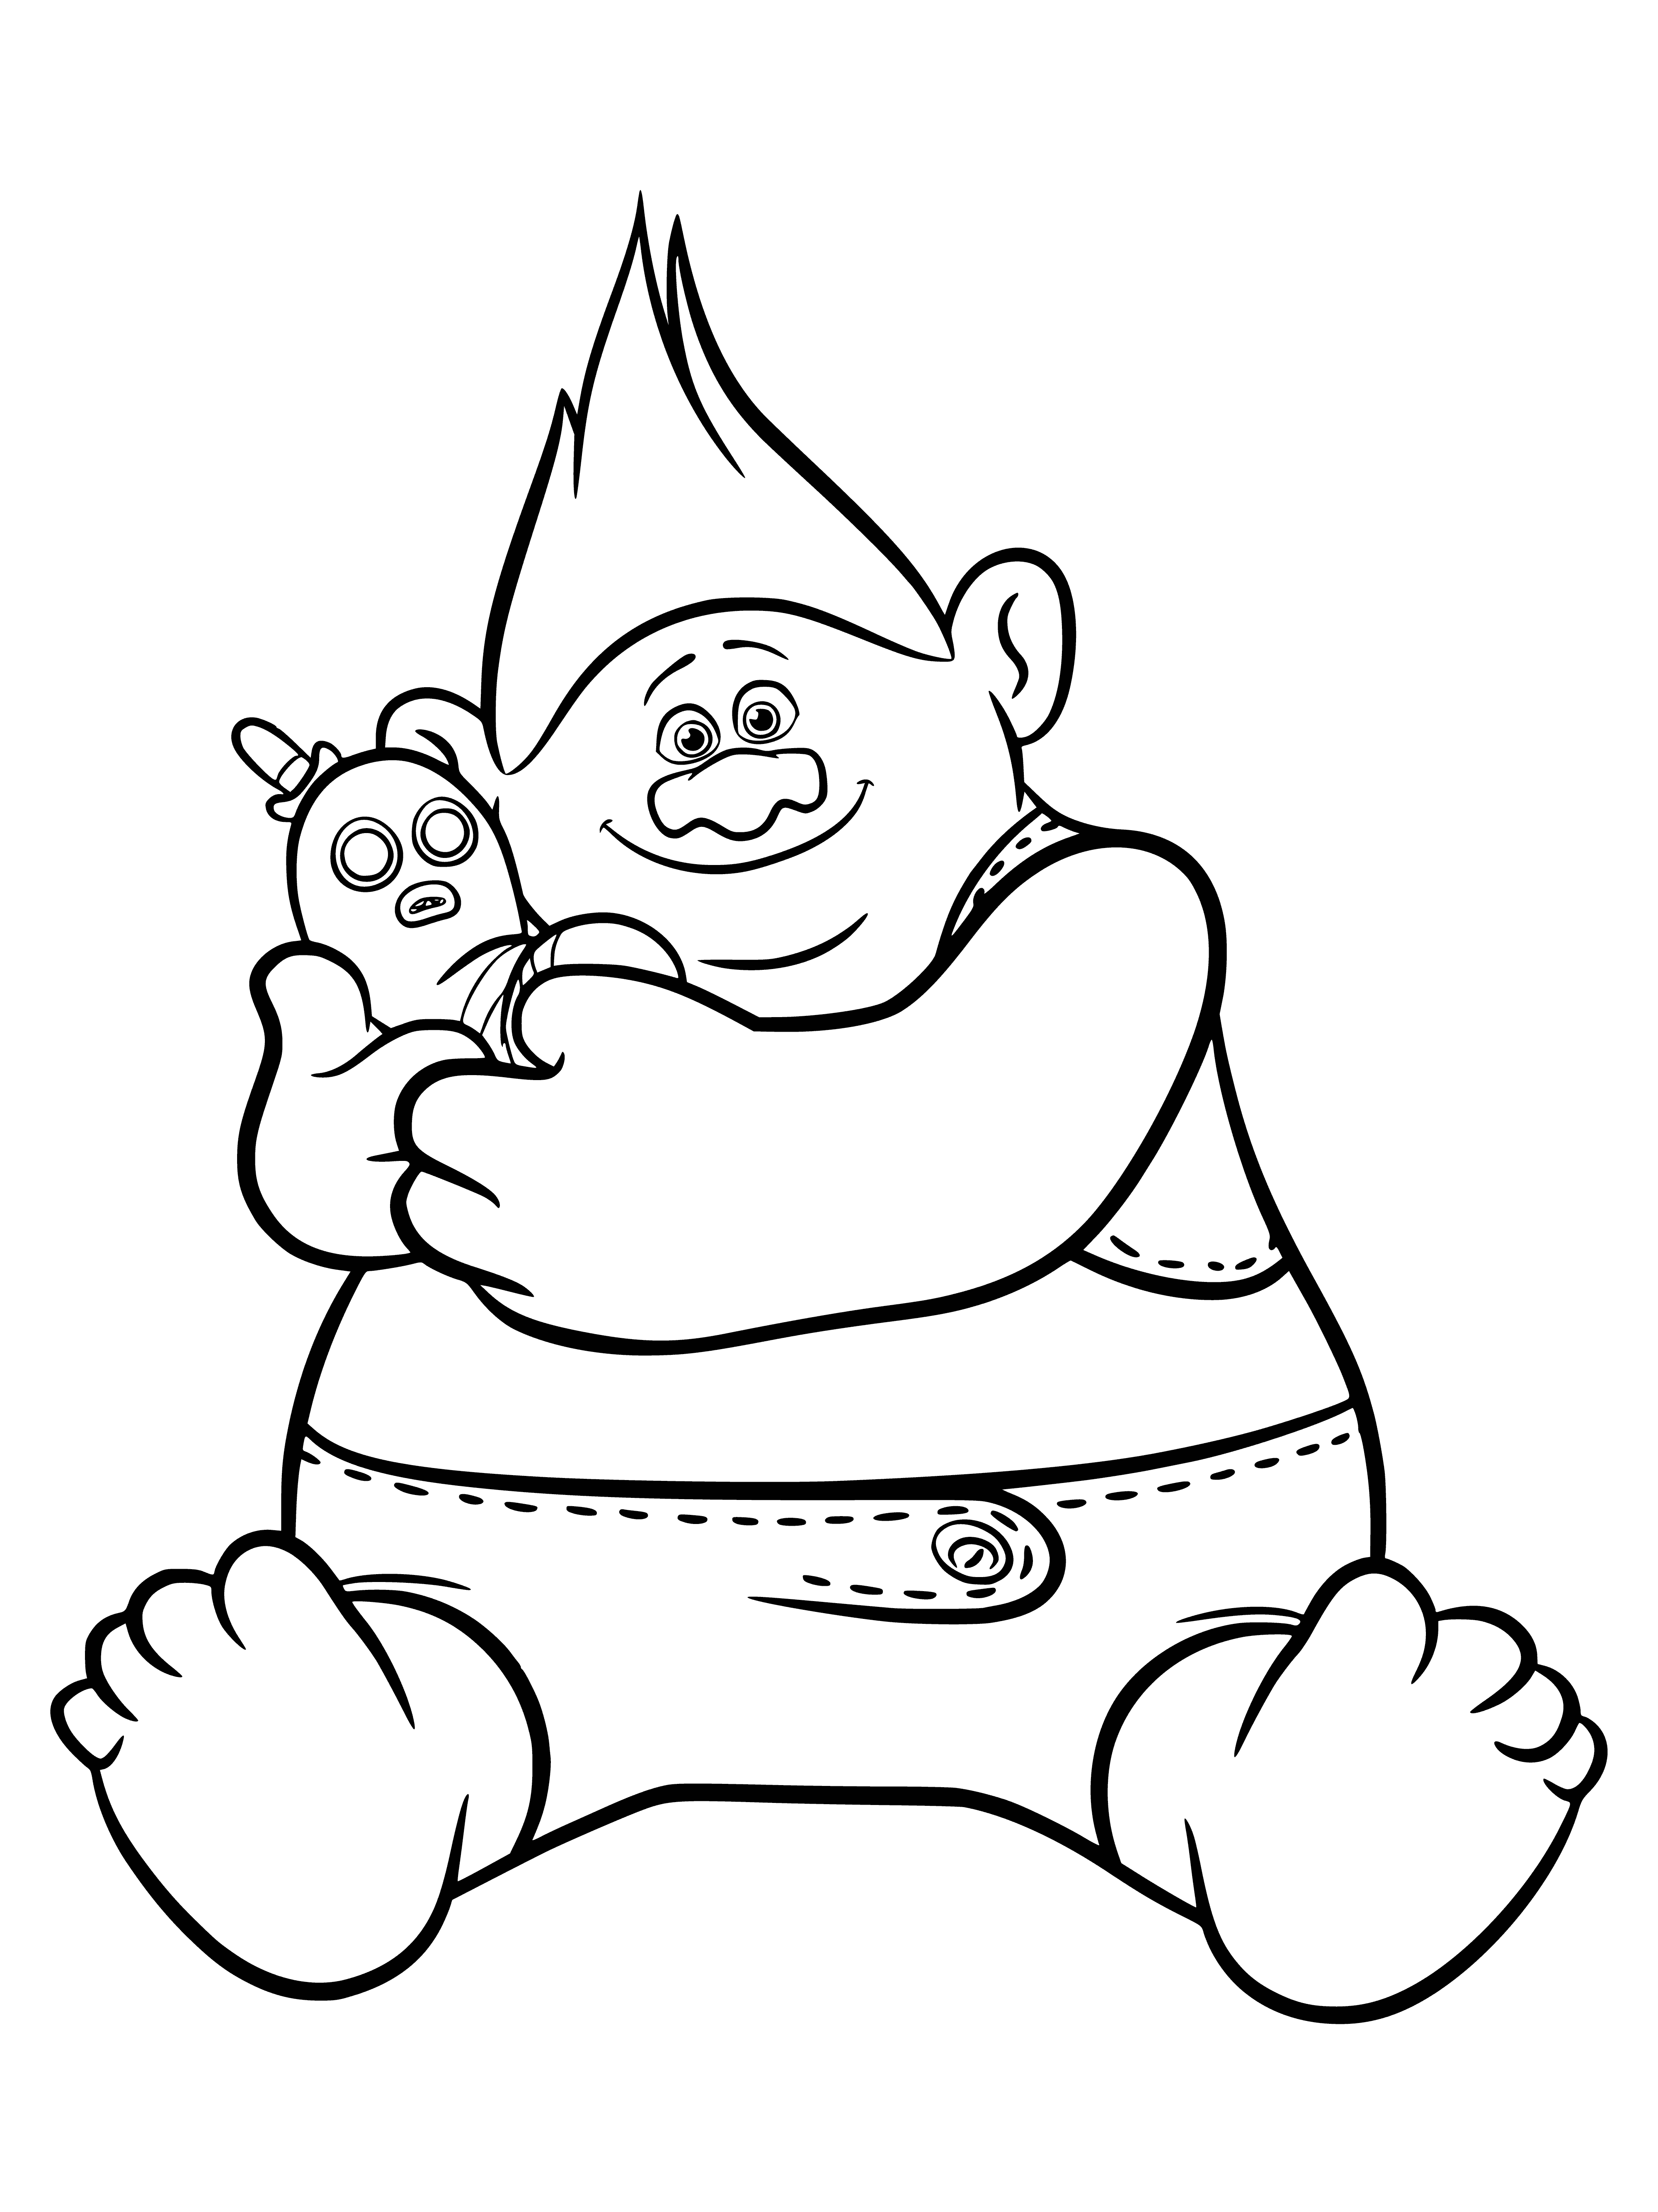 Troll Big Man and his pet Friend coloring page